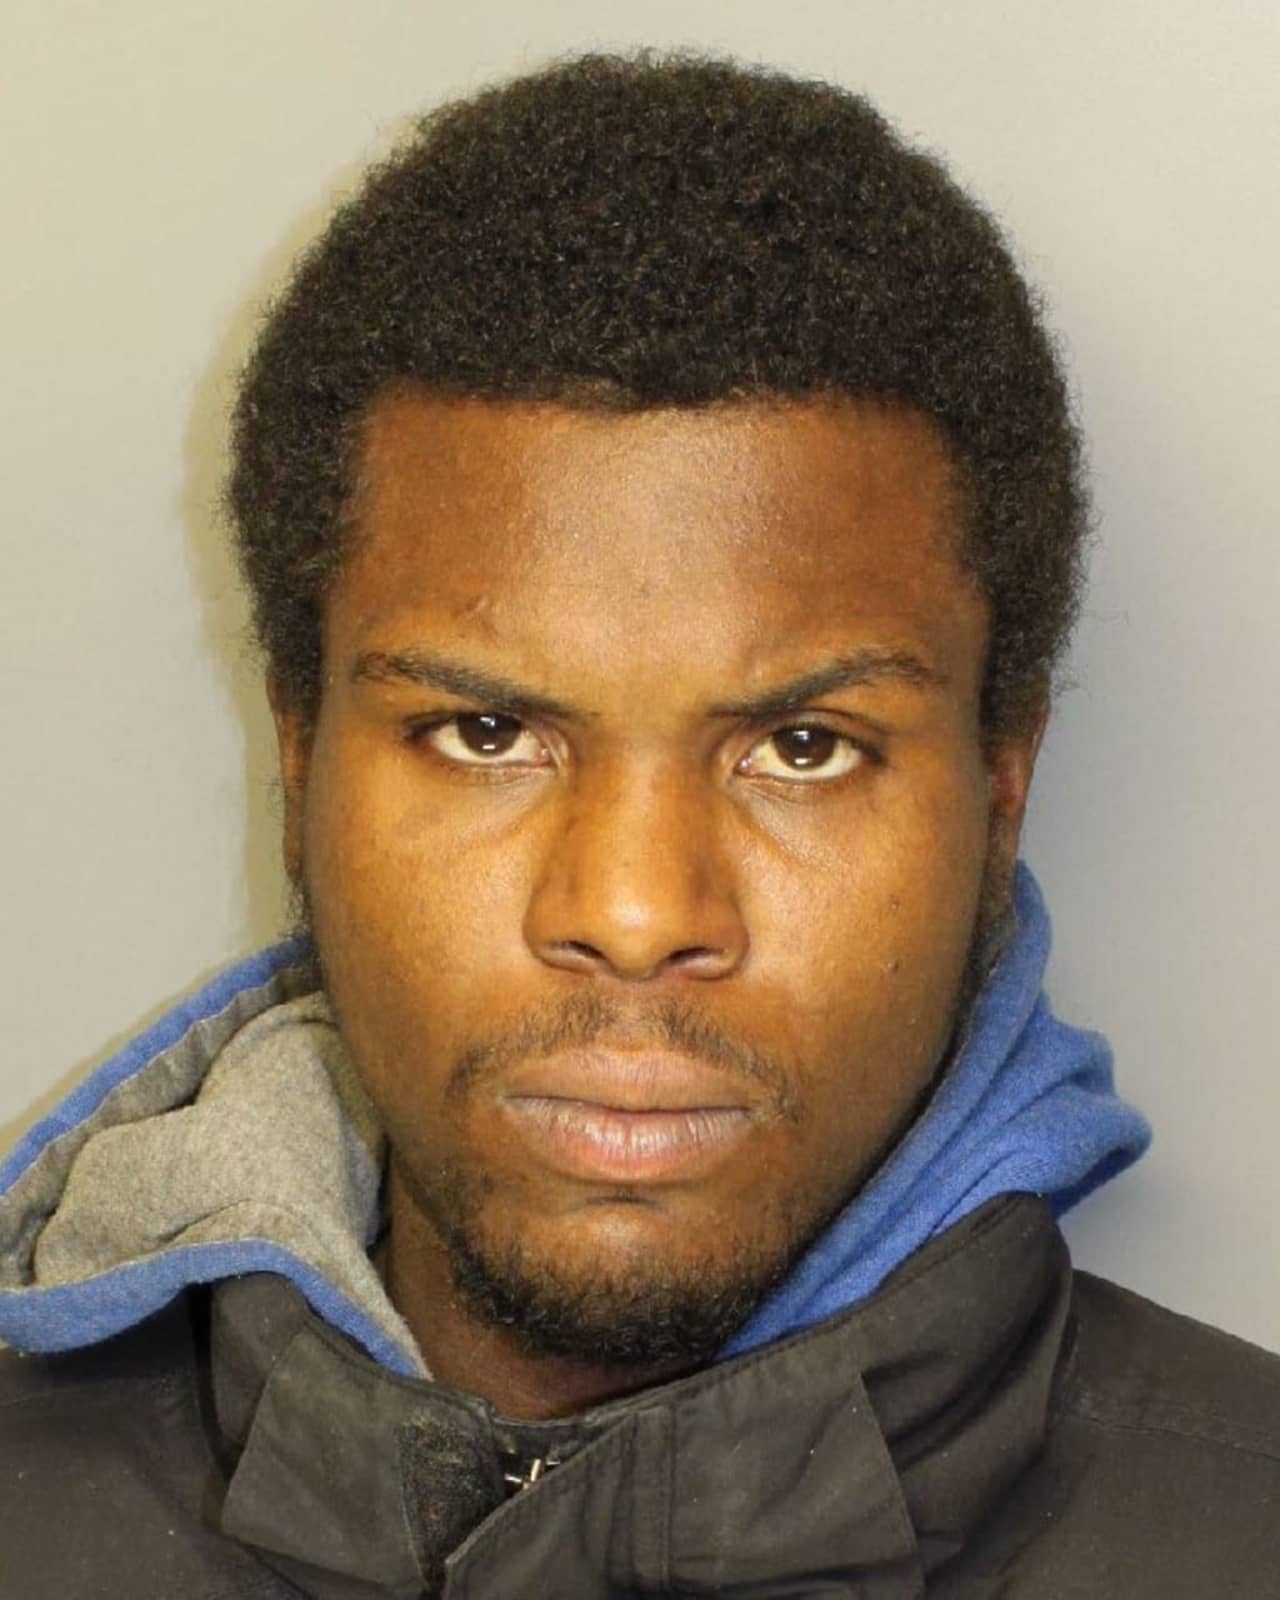 Sheedley Pierre faces life in prison for his part in a fatal armed robbery of a cab driver.